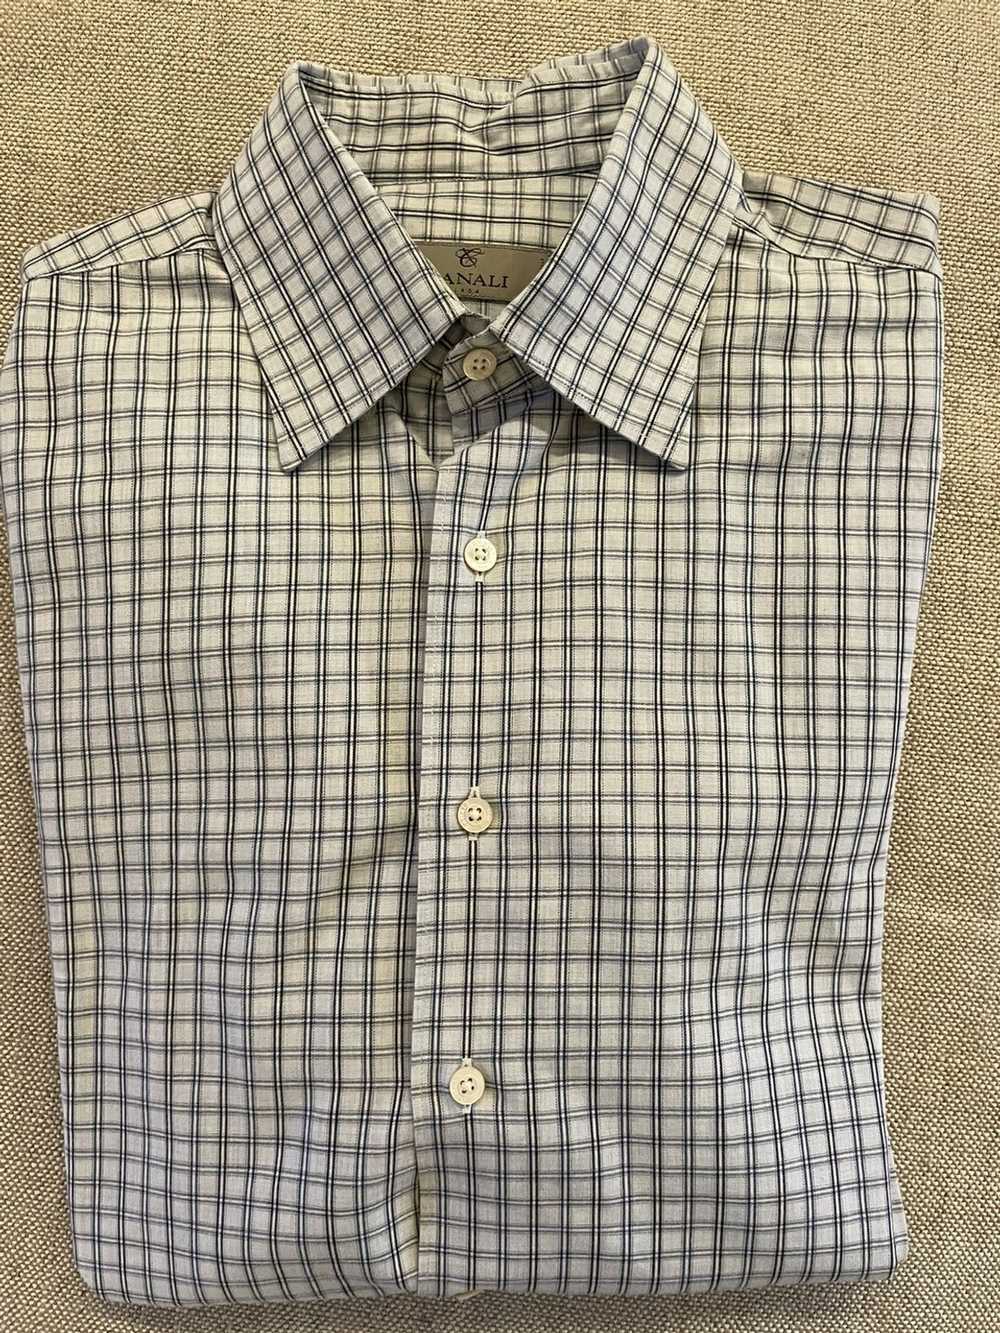 Canali Double Grid Check Shirt - image 5